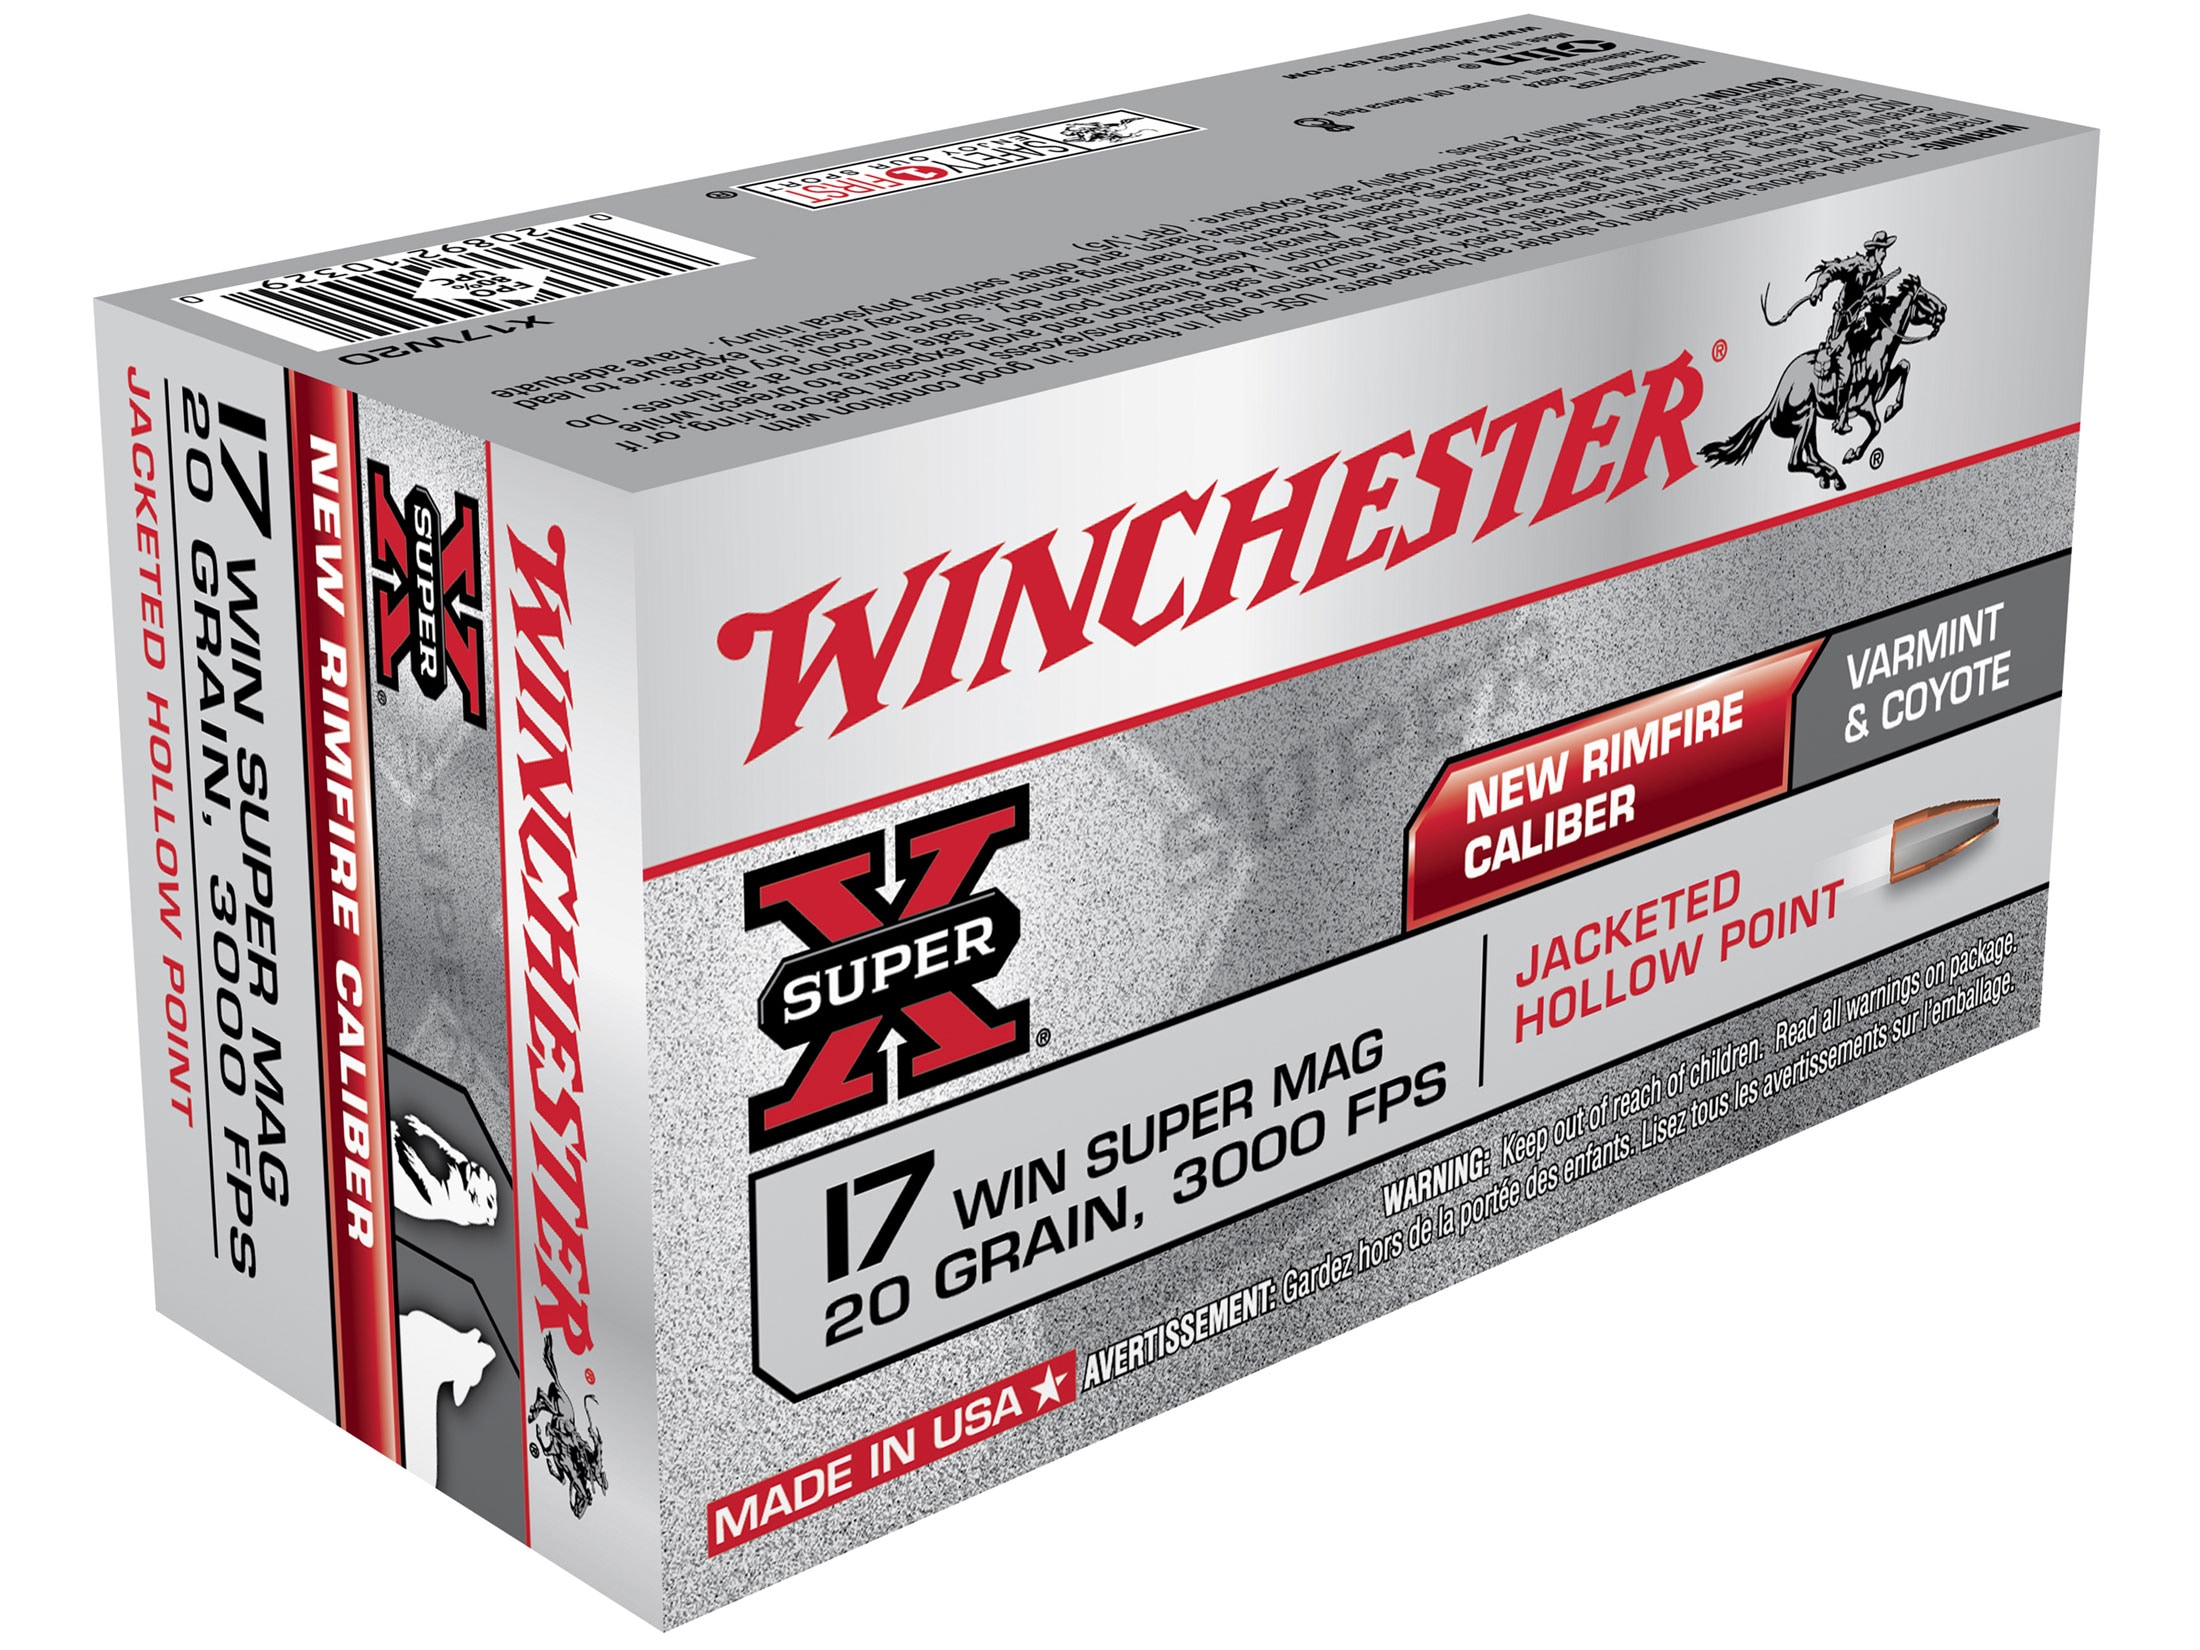 Winchester Super X Ammo Winchester Super Mag Grain Jacketed